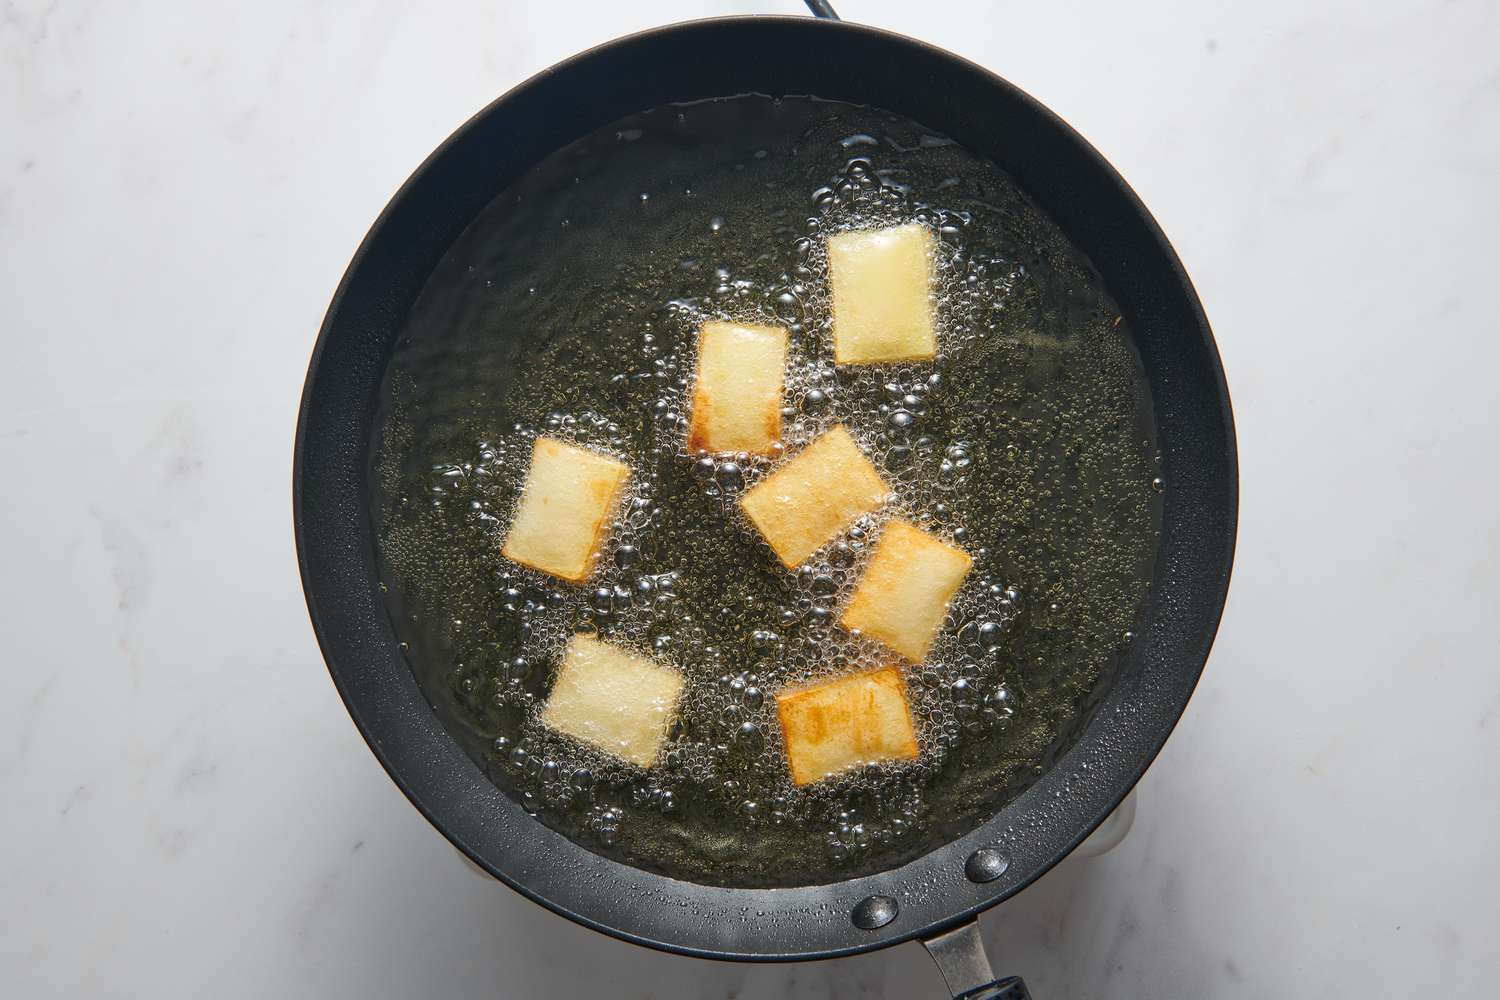 A pan with small rectangular stacks of thinly sliced potatoes frying in oil